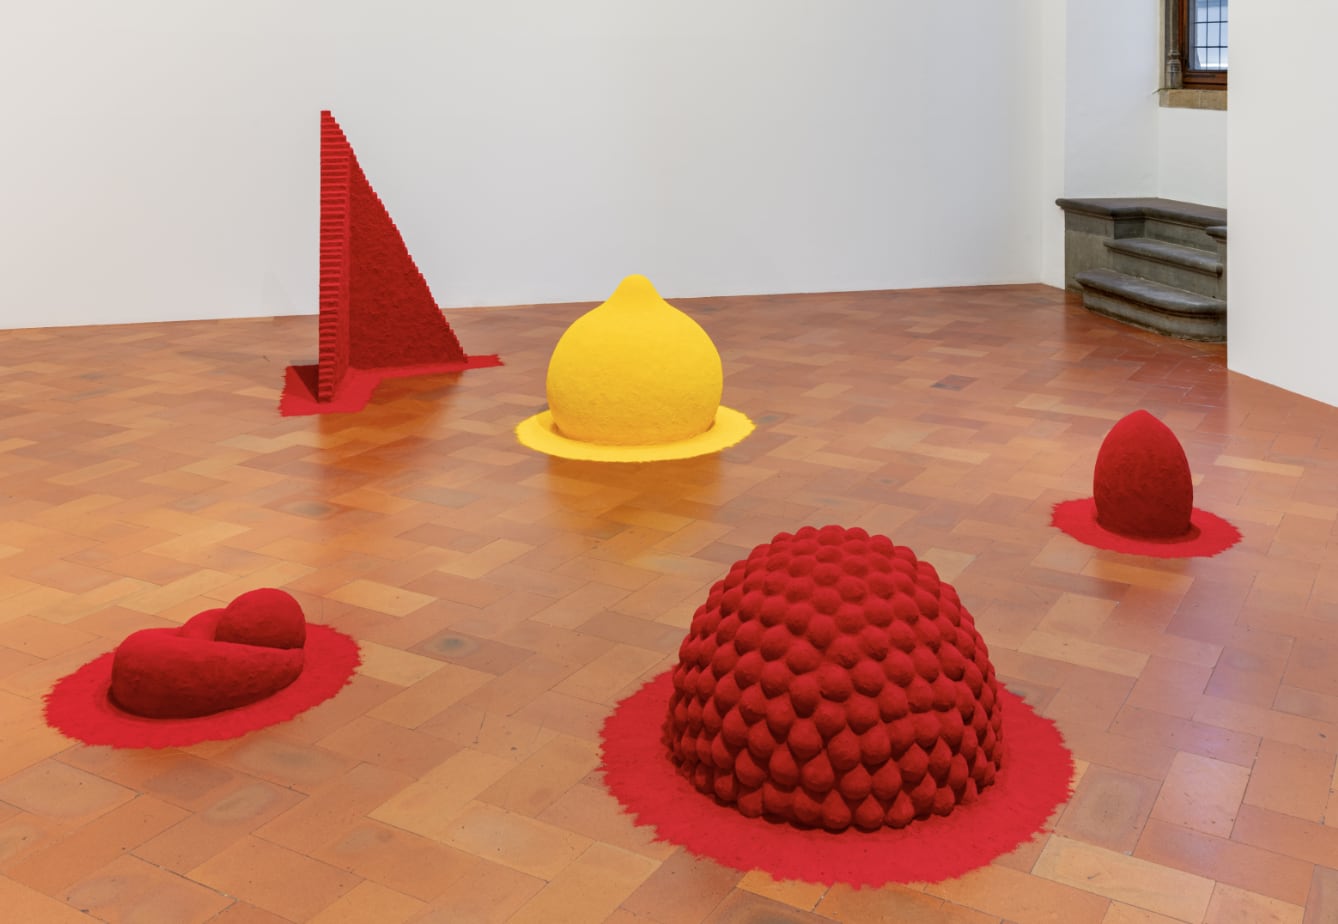 geometric shapes in yellow and red rest on a wooden gallery floor